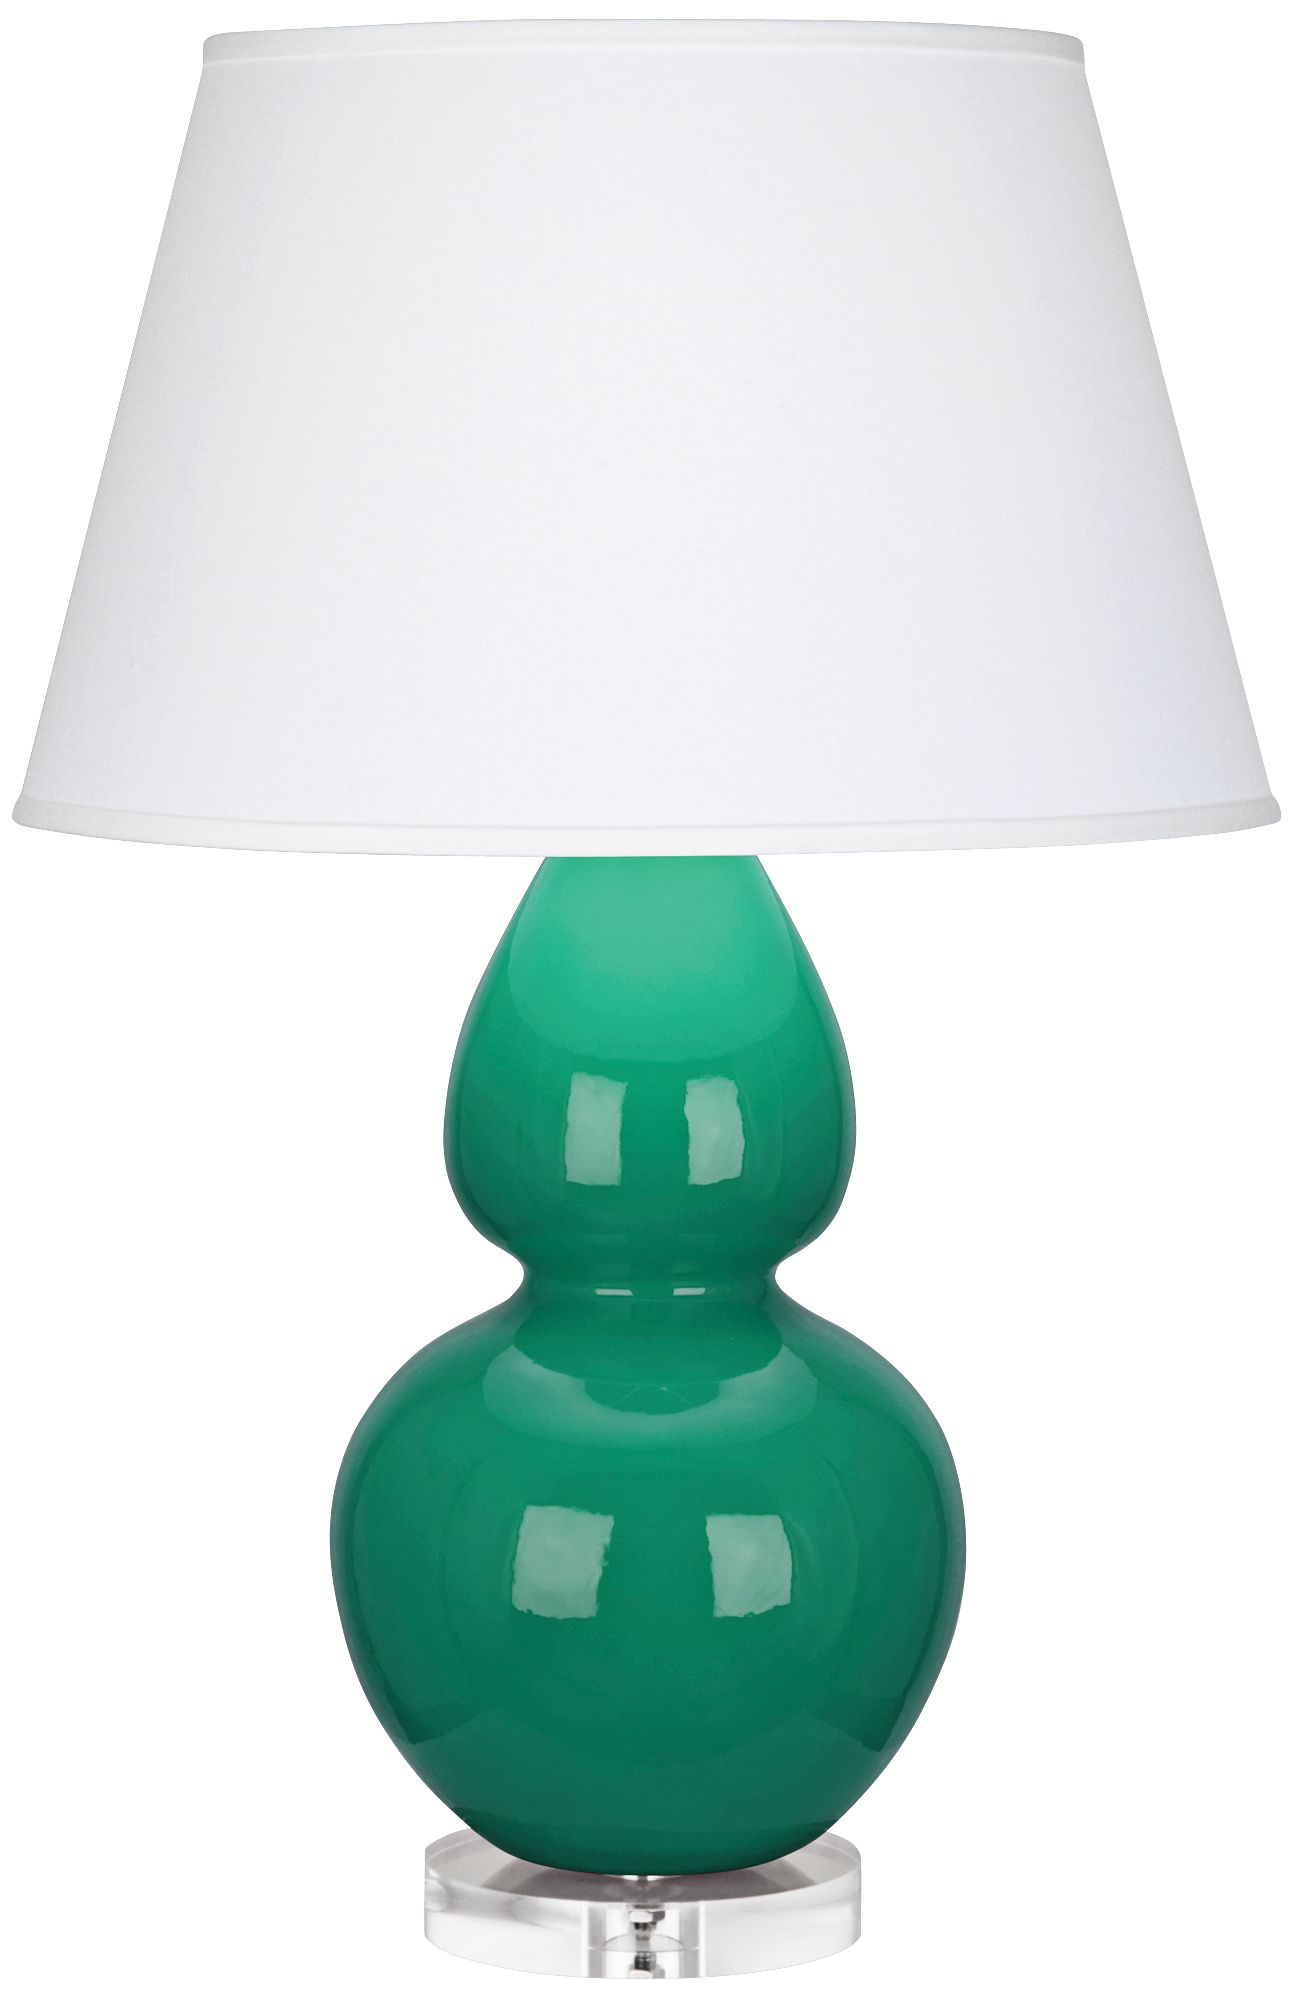 Robert Abbey Emerald Double Gourd Ceramic Table Lamp